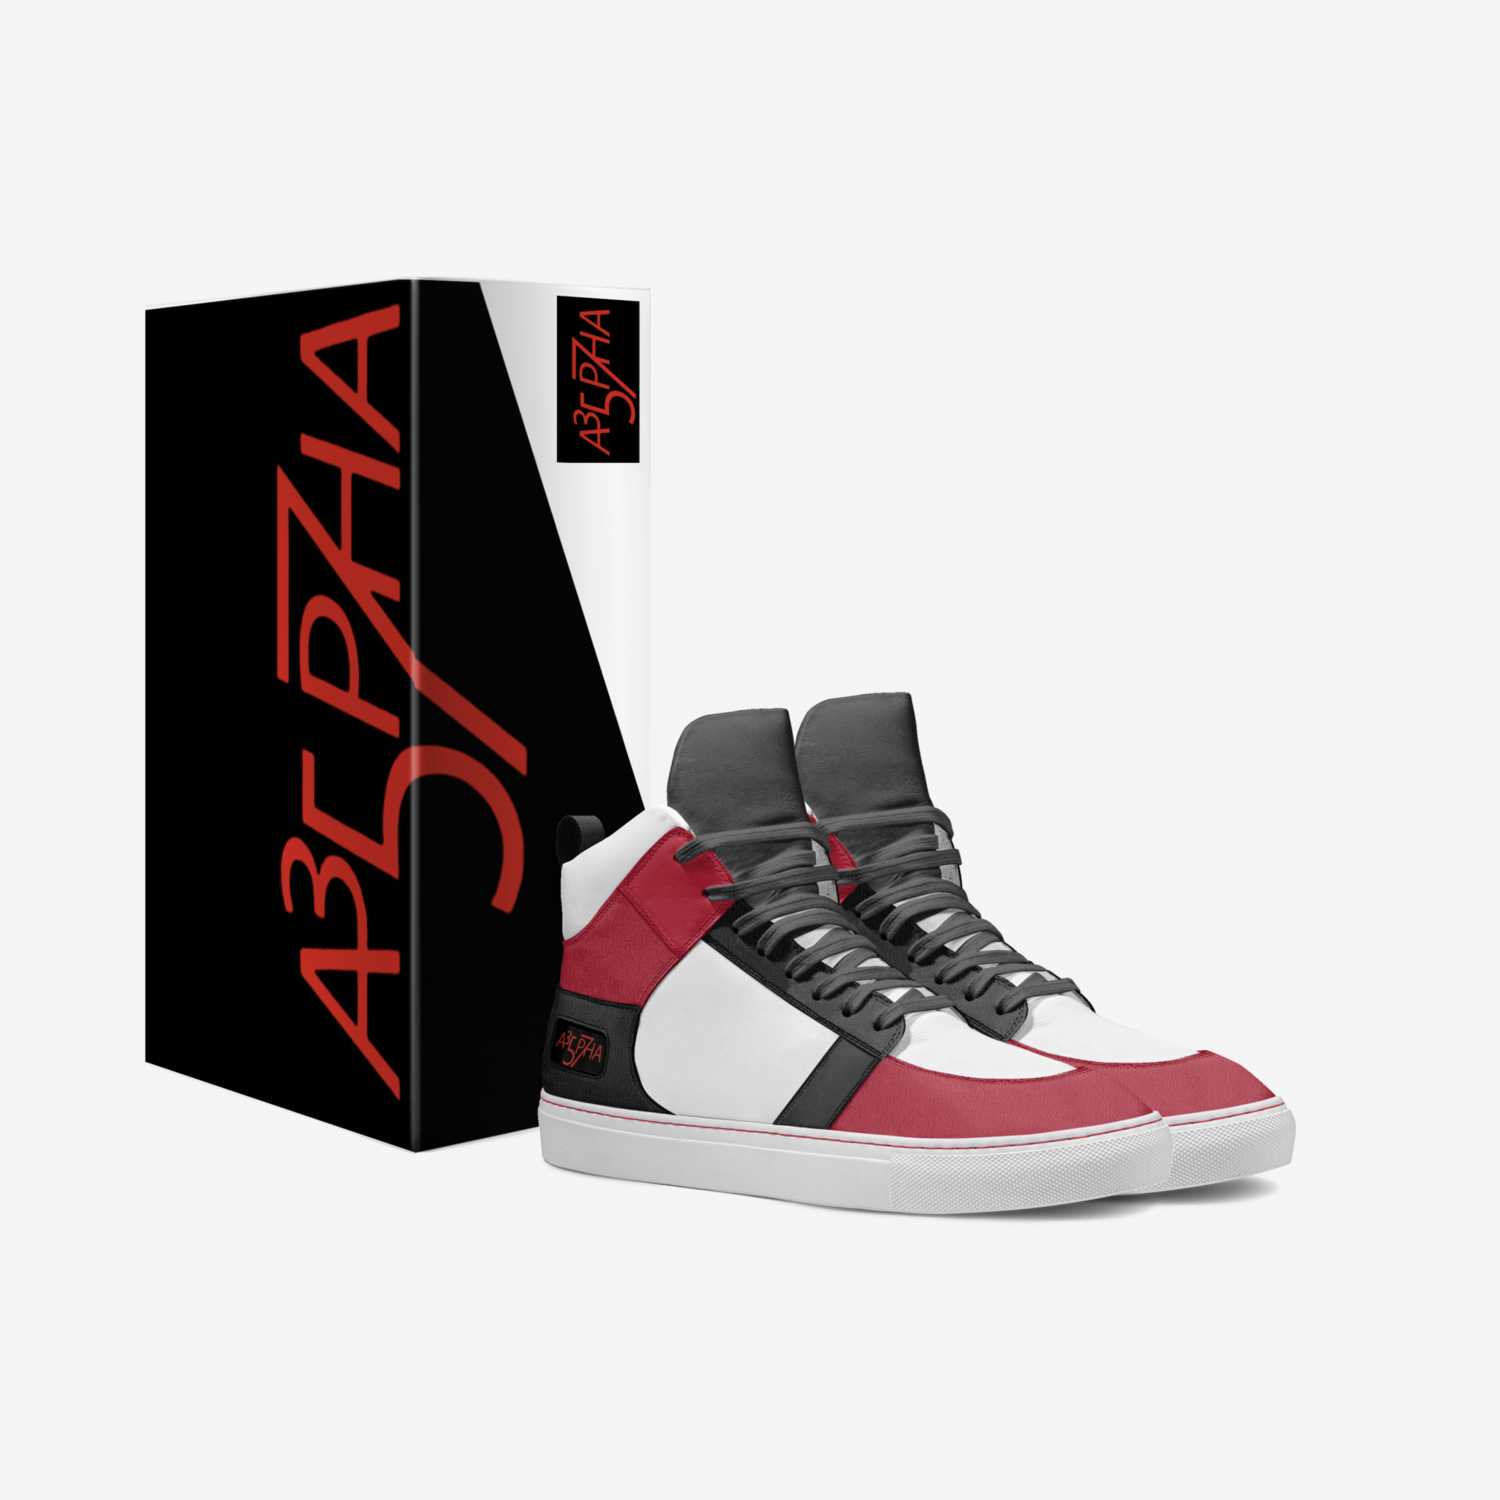 Alpha R3tro High custom made in Italy shoes by Aldric Horton Jr | Box view